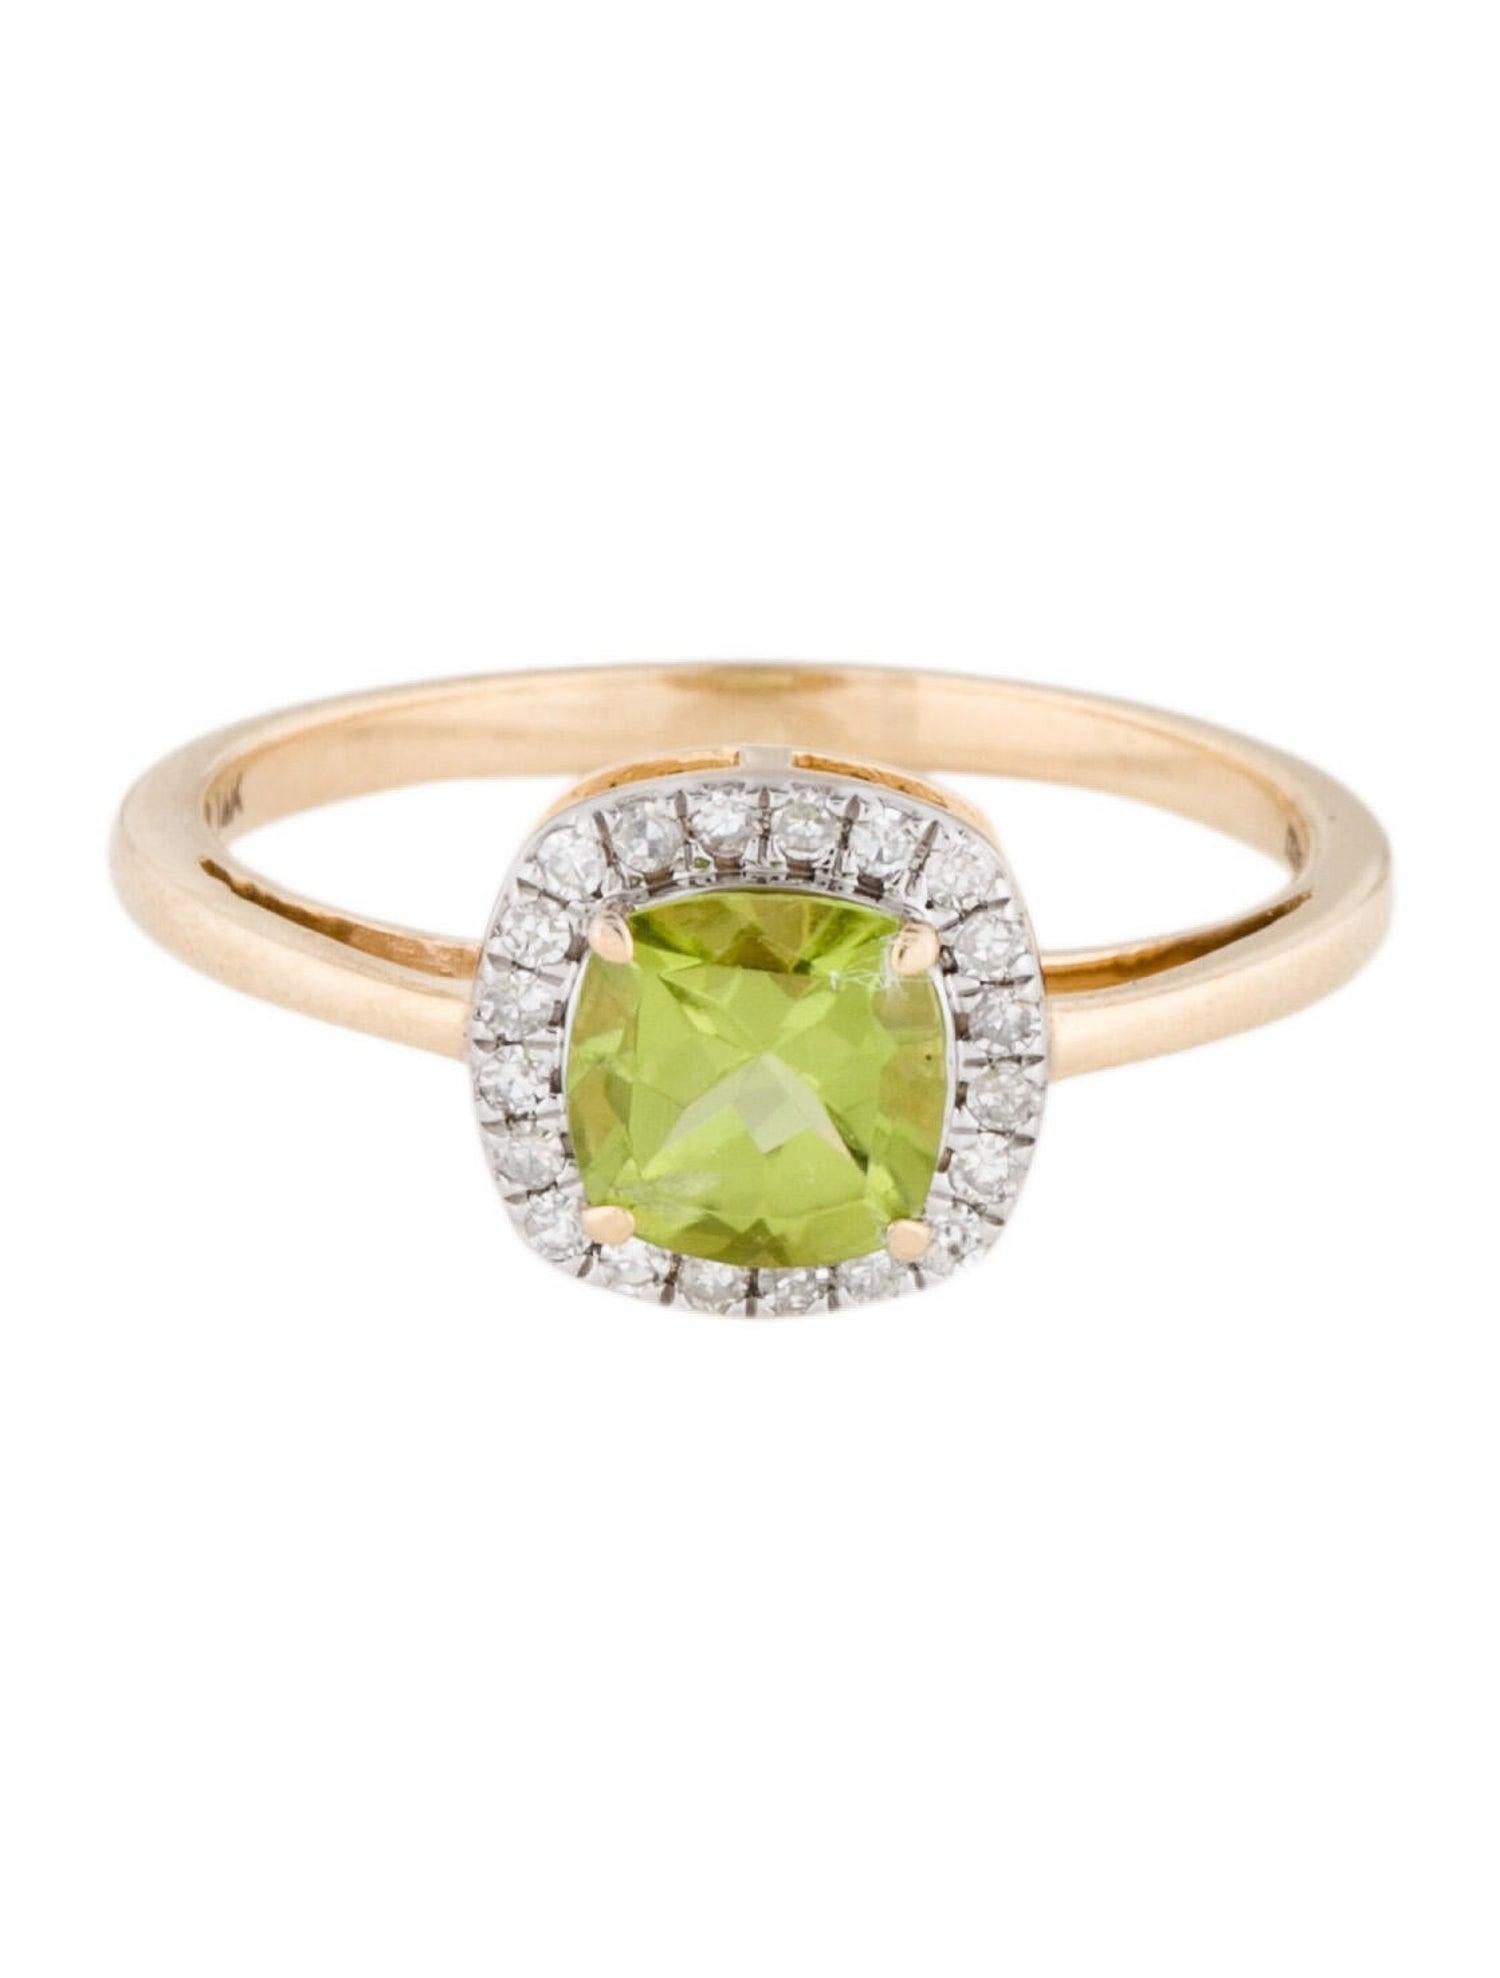 Elevate your style with the exquisite Harmony in Green collection by Jeweltique. This stunning Peridot and Diamond Ring is a testament to the natural beauty that surrounds us. The lush green hues of the cushion-cut Peridot, cradled in a 14k Yellow